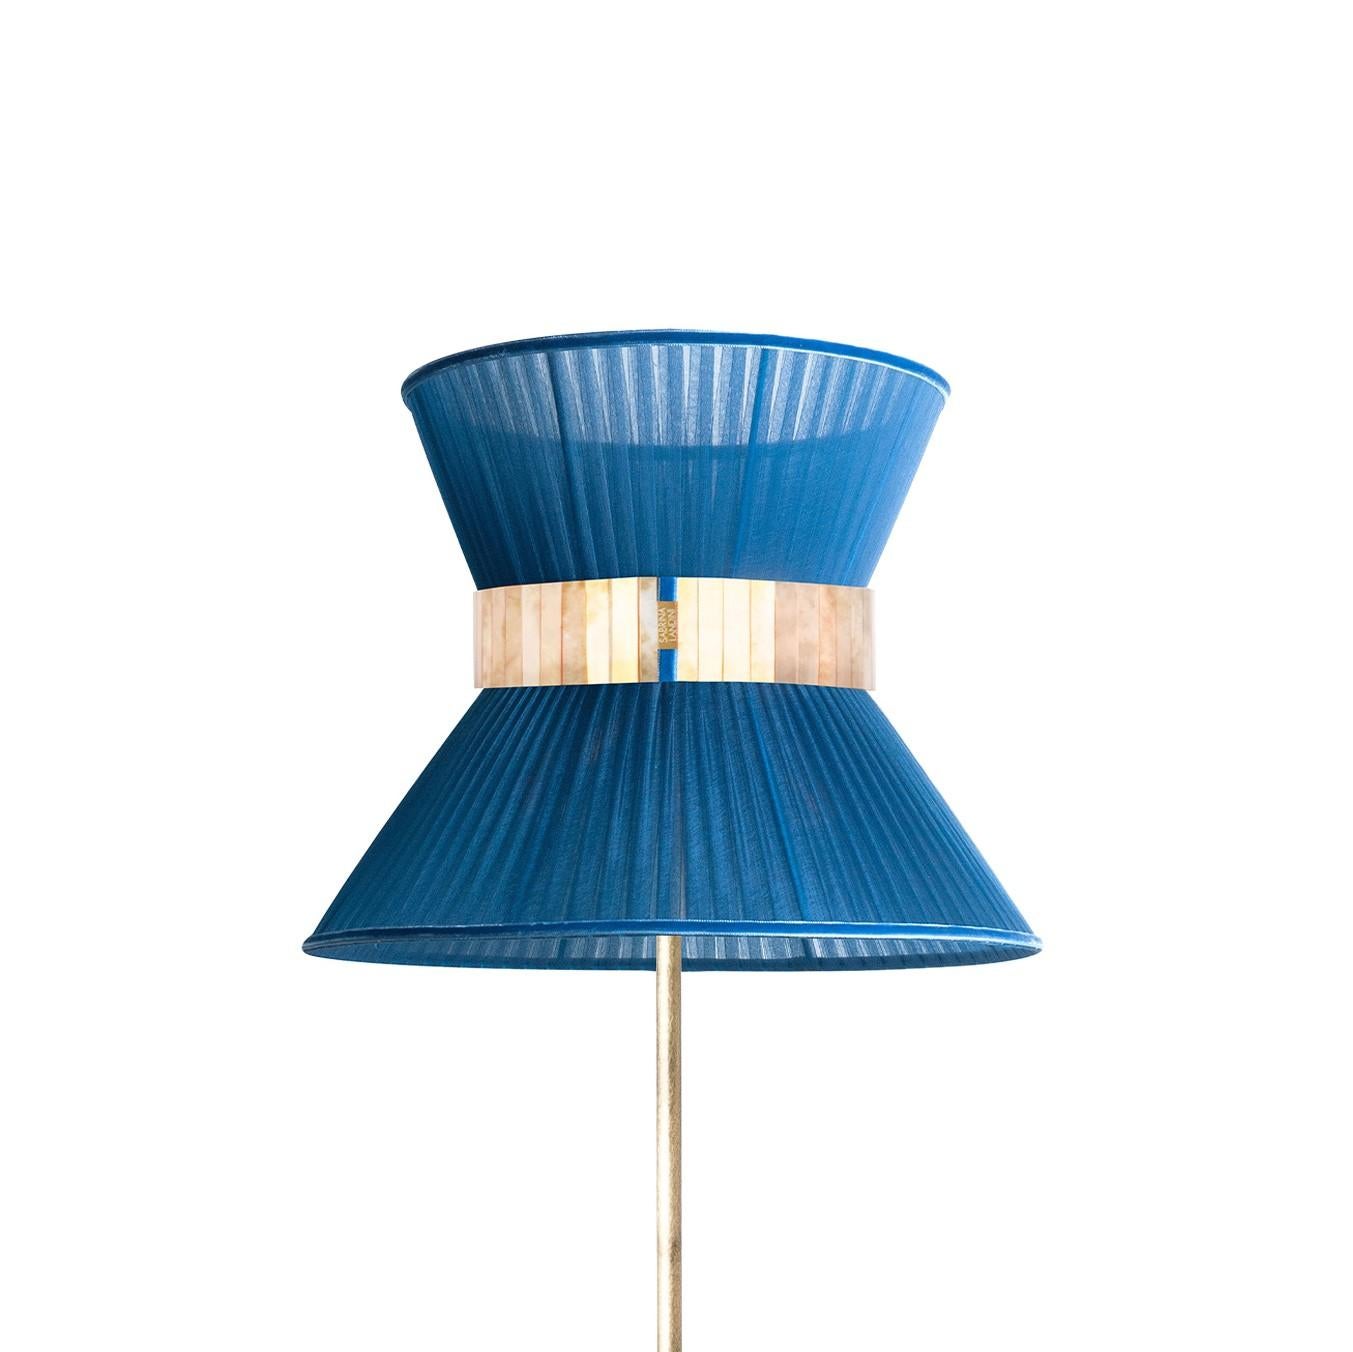 Tiffany the iconic lamp!

For 20 years, we have been committed to offering you unique collections in terms of design and quality. Using an ancestral manufacturing silvering method, all our iconic products are handmade in our atelier in Tuscany,